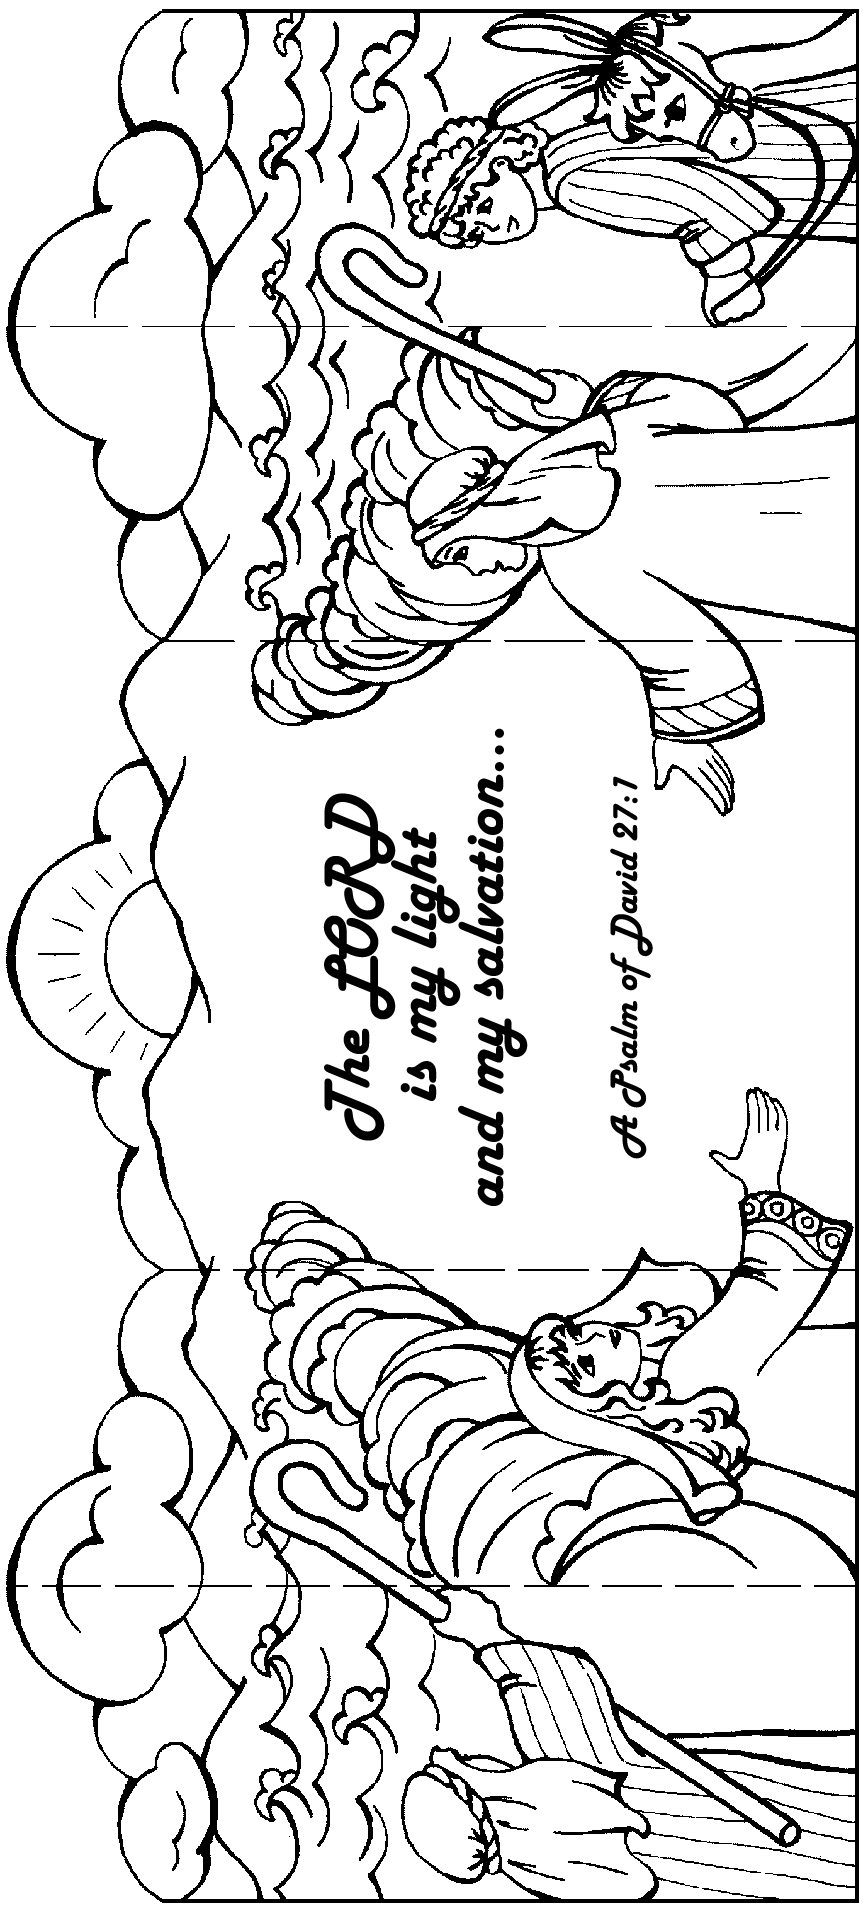 Moses clipart outline. Card the lord is